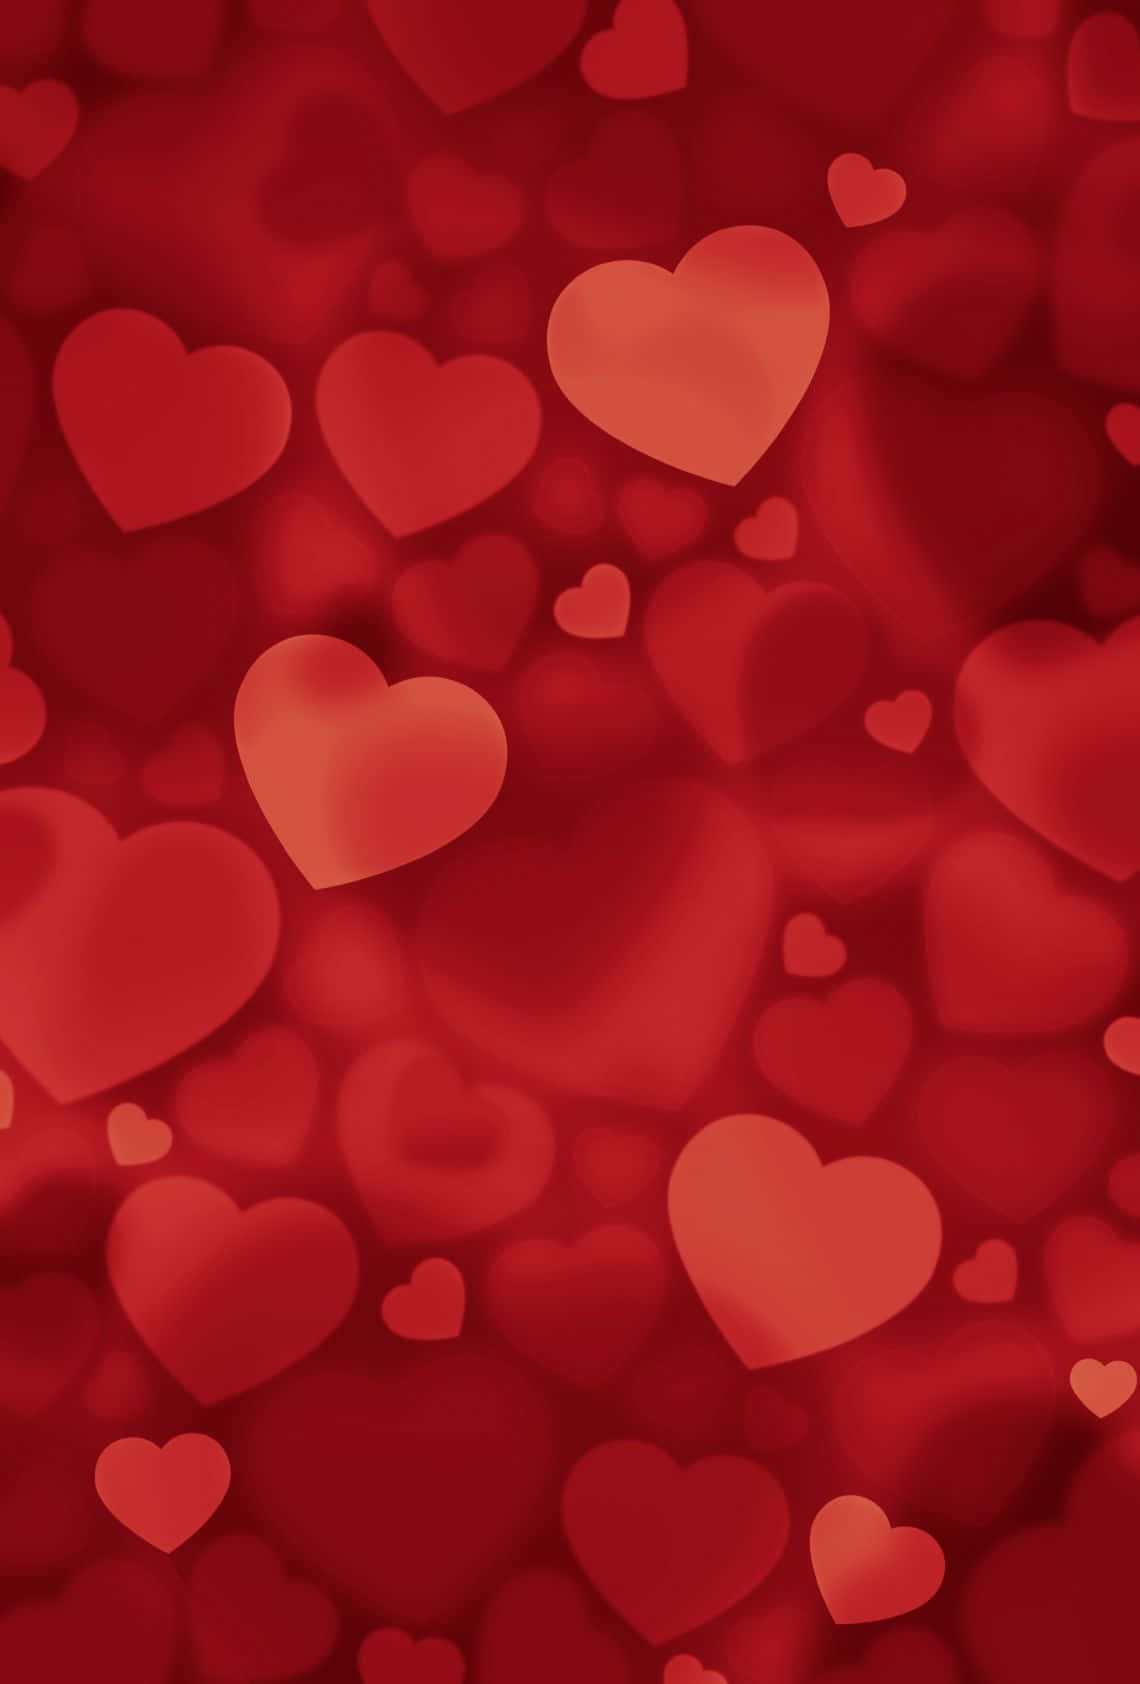 "passionate Embrace: A Stunning Red Heart Background"